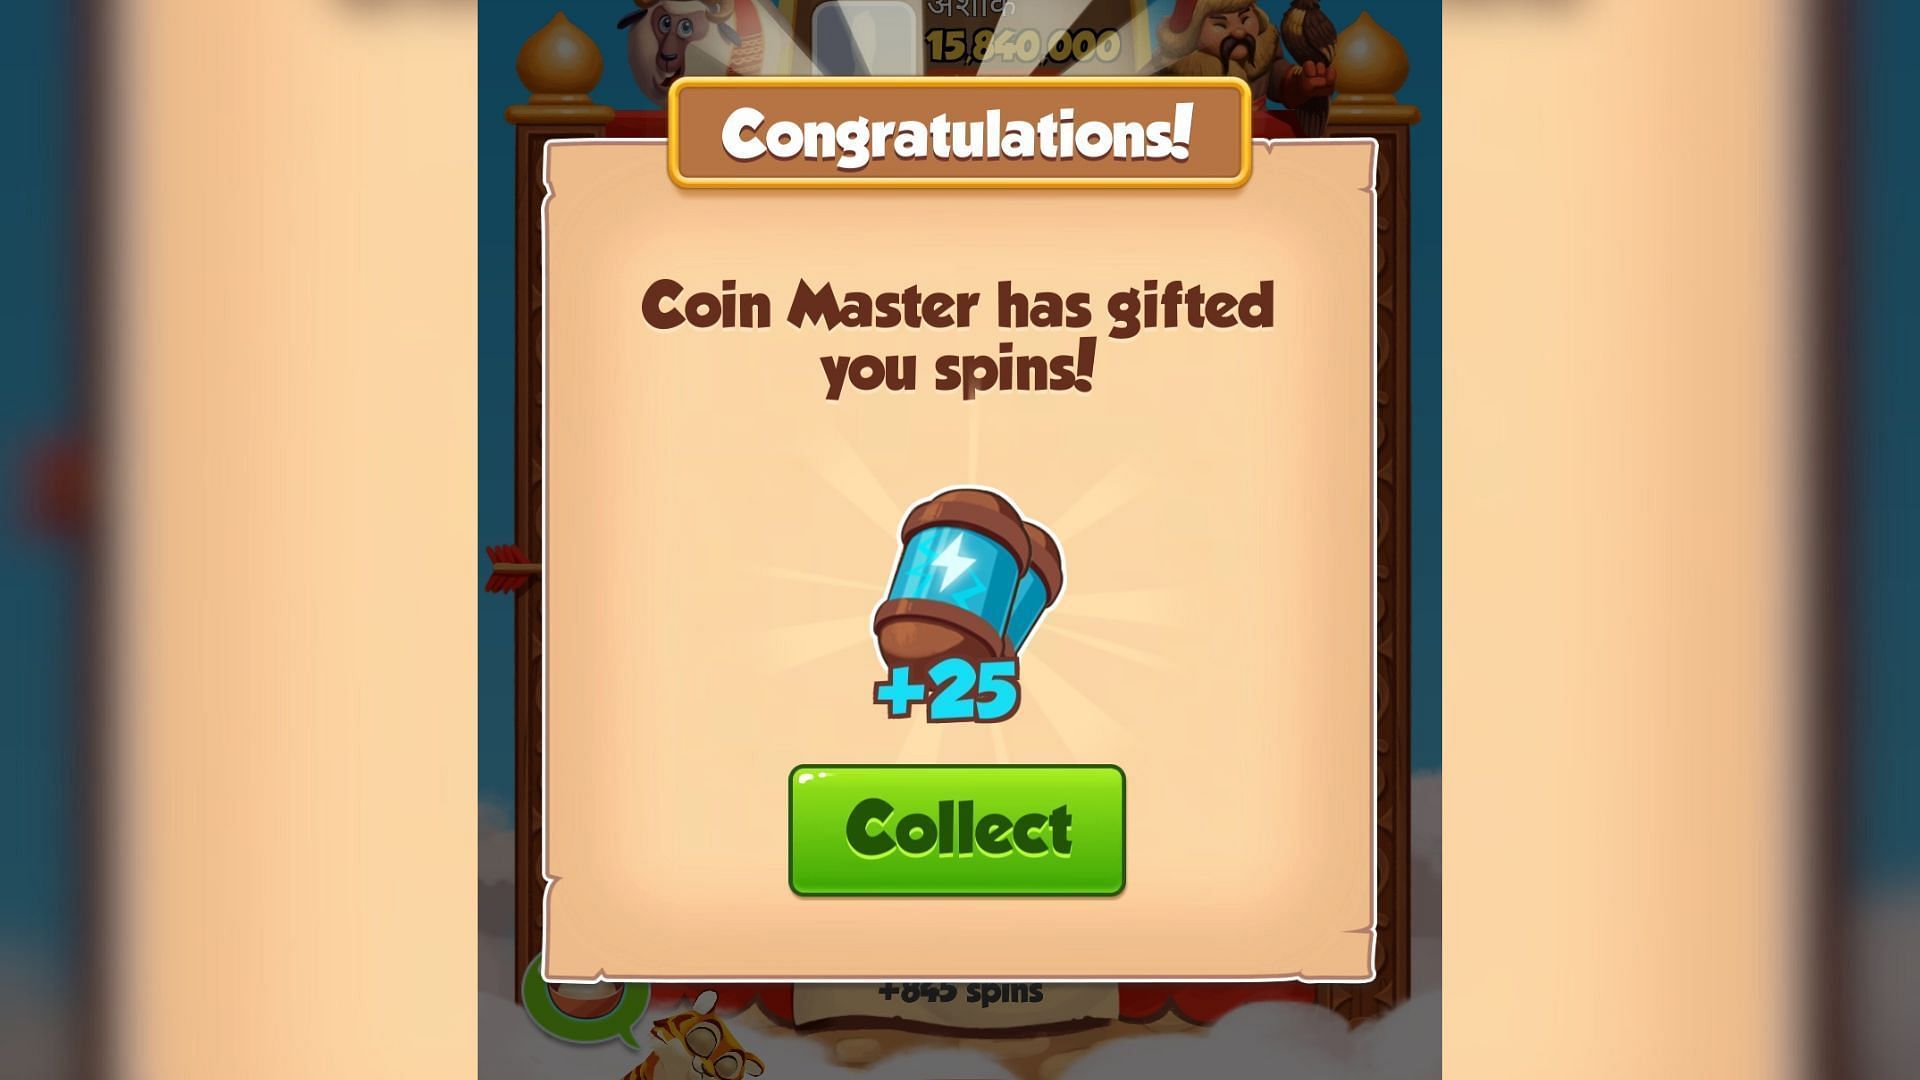 Congratulation today special reward. we are giving 19,500 spins free to all Coin  master players.Collect Now:, June 6 to June 19, Online Event